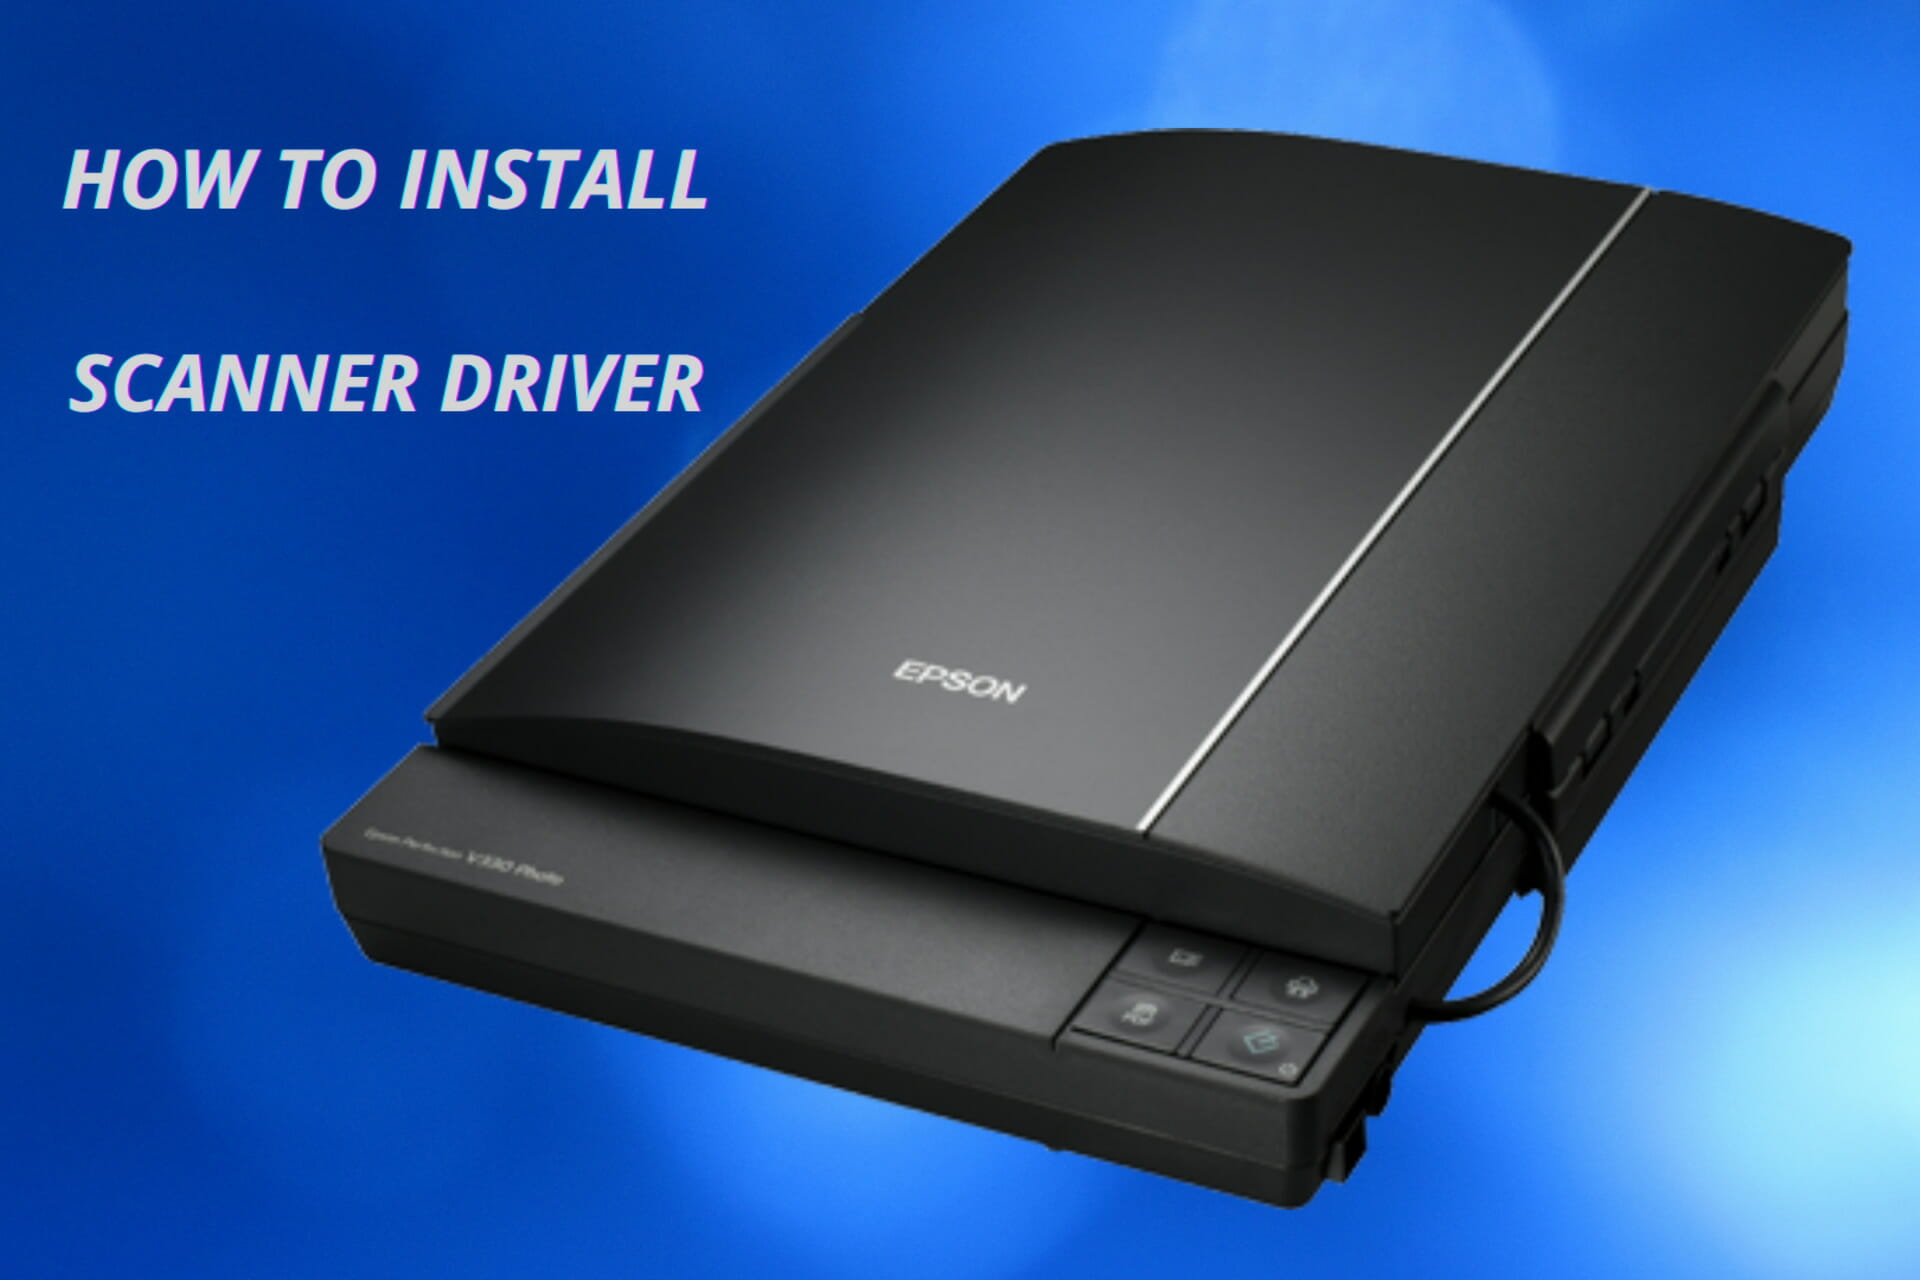 How to install the Epson scanner driver [Easy Guide]